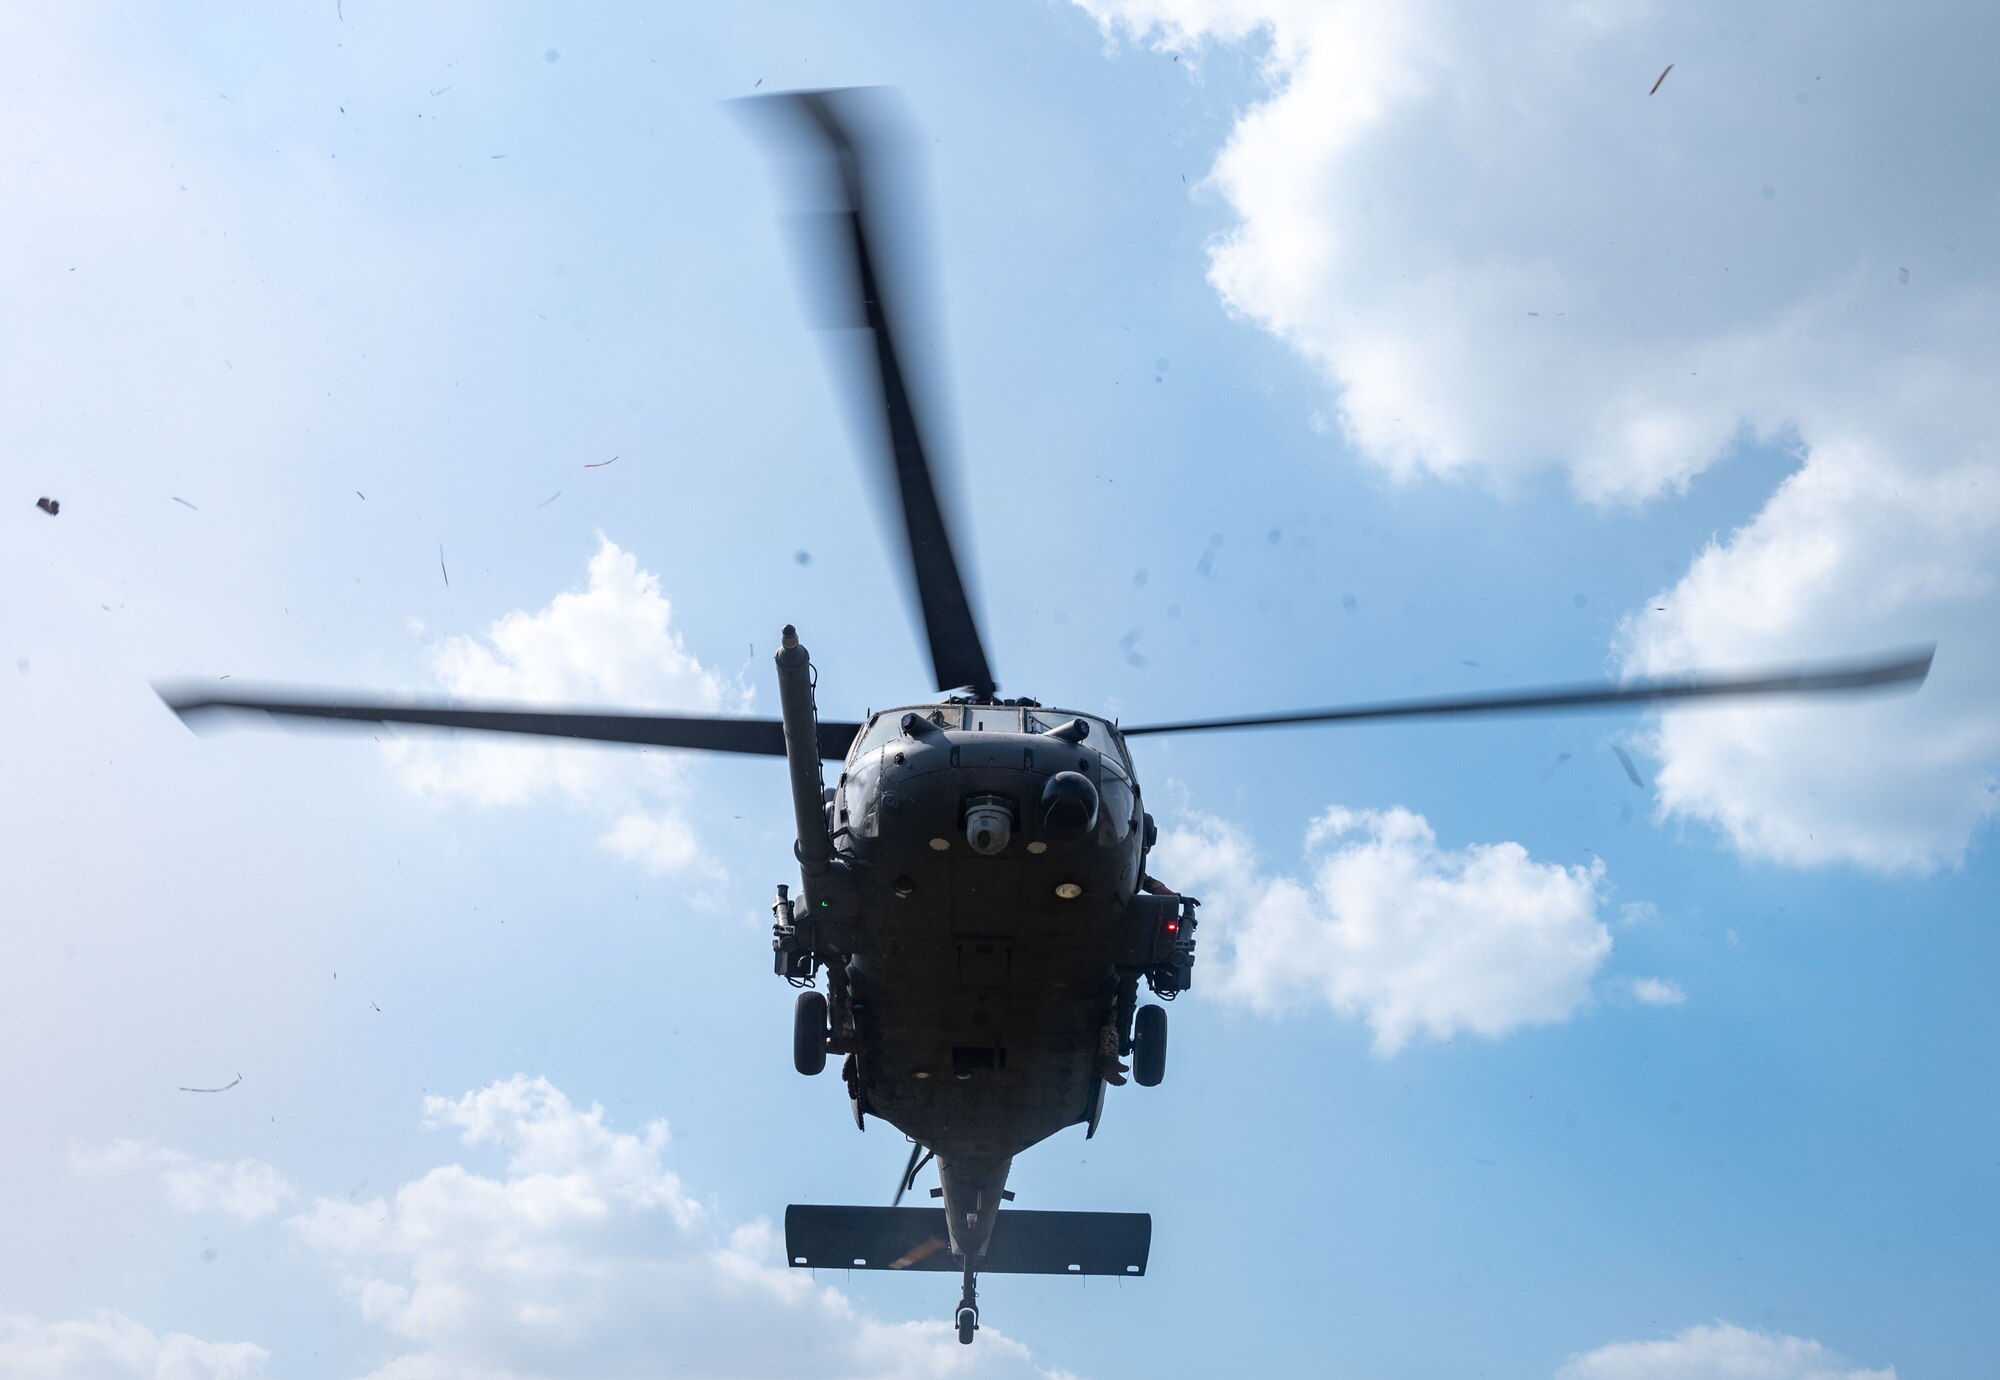 301st conducts Display alternate insertion, training Article 920th extration Rescue Wing > 